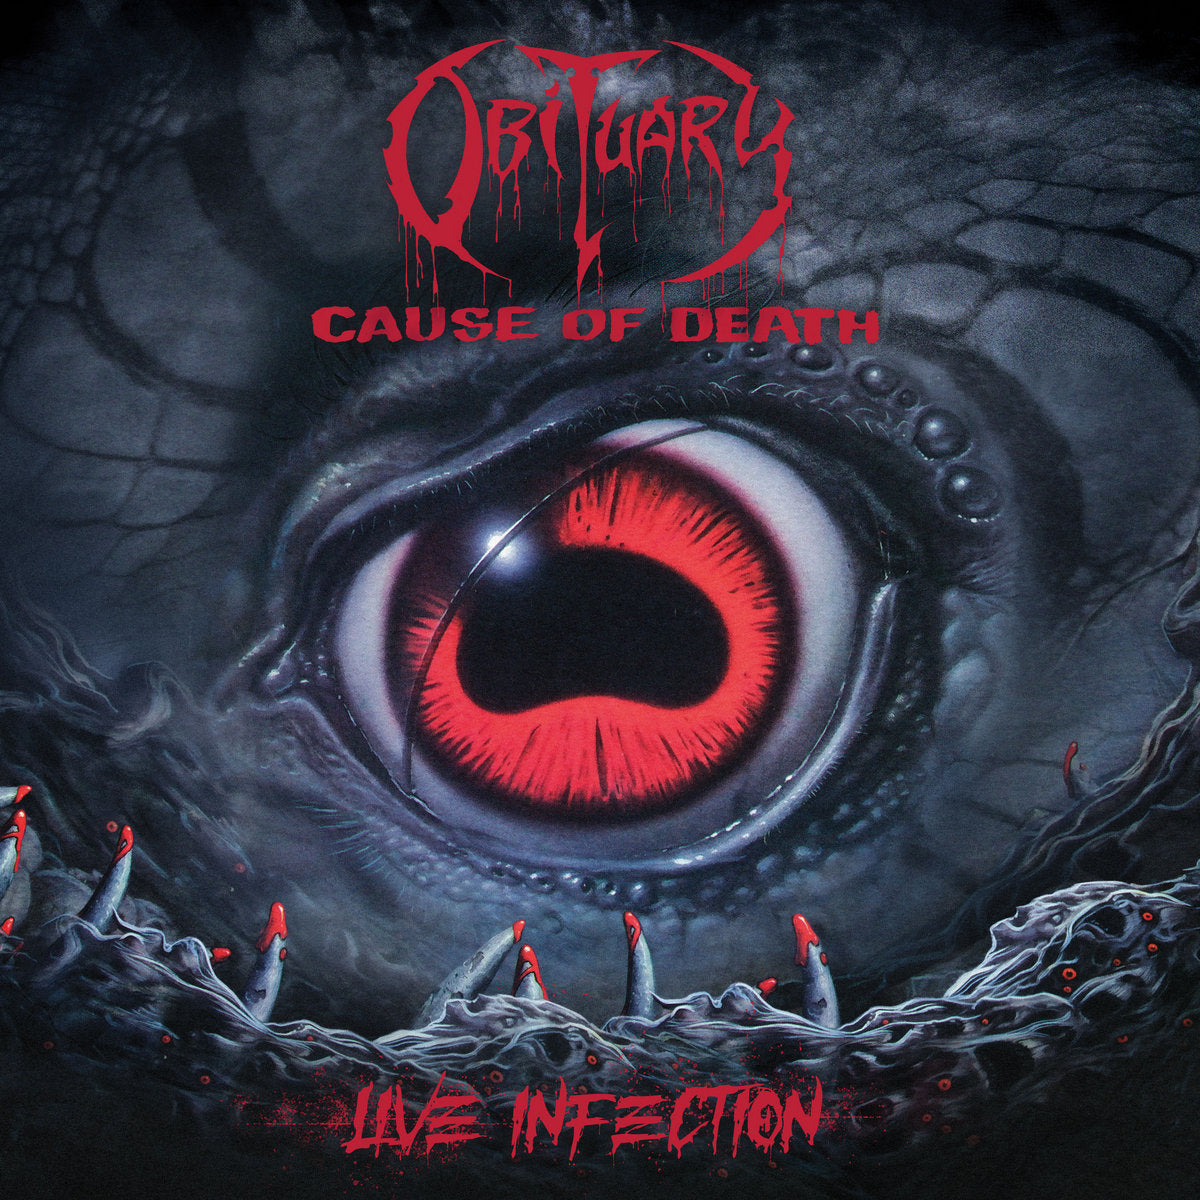 Obituary "Cause of Death - Live Infection" CD/Blu-ray